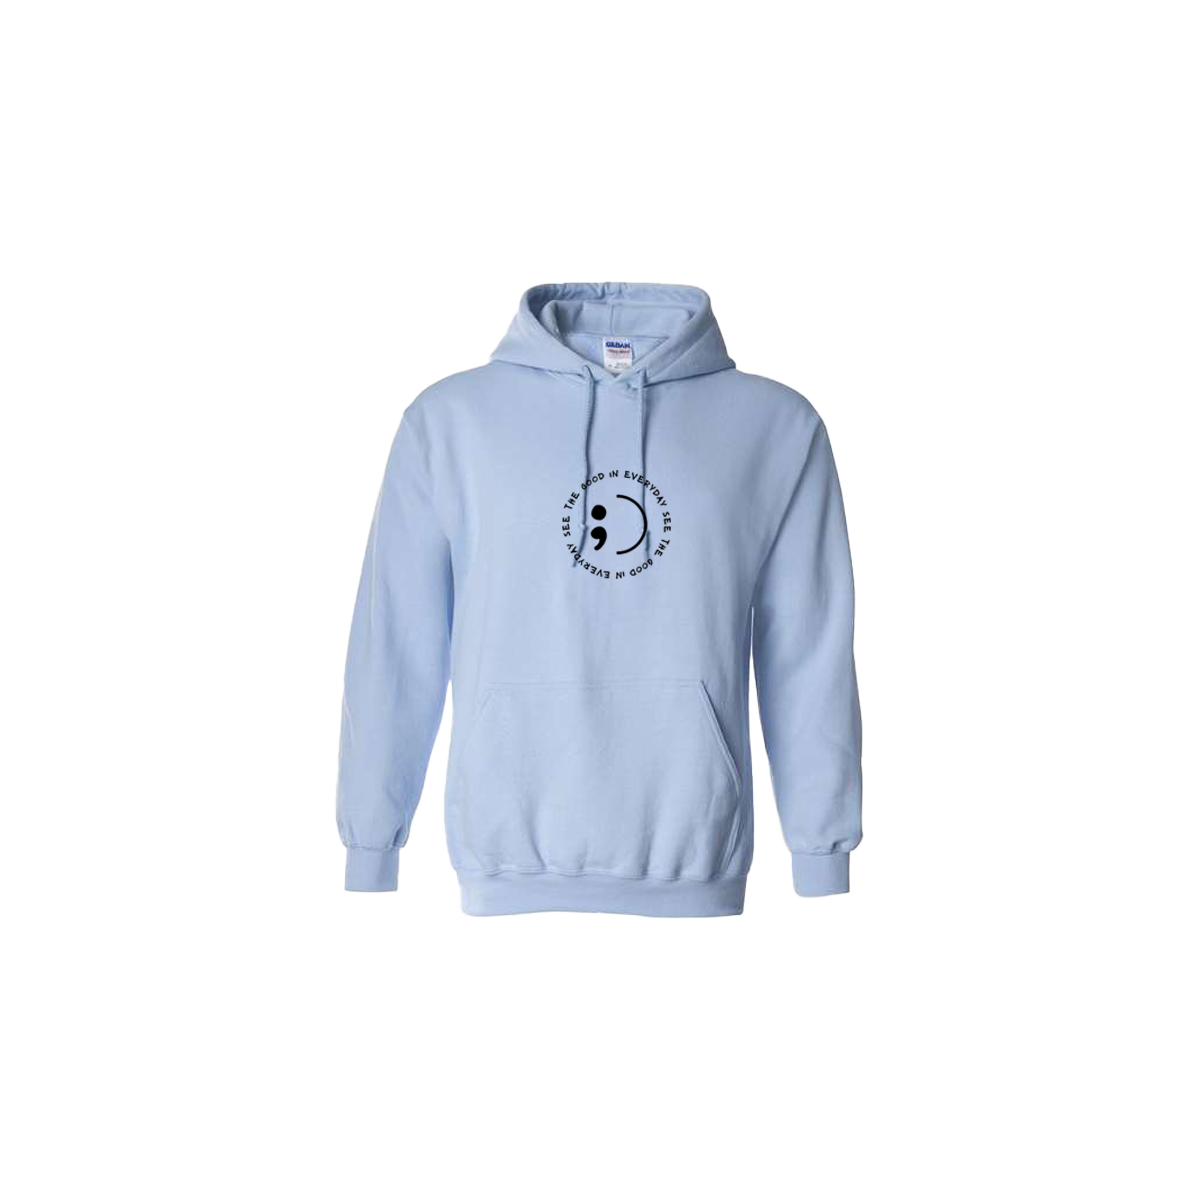 See the Good in Everyday Embroidered Light Blue Hoodie - Mental Health Awareness Clothing